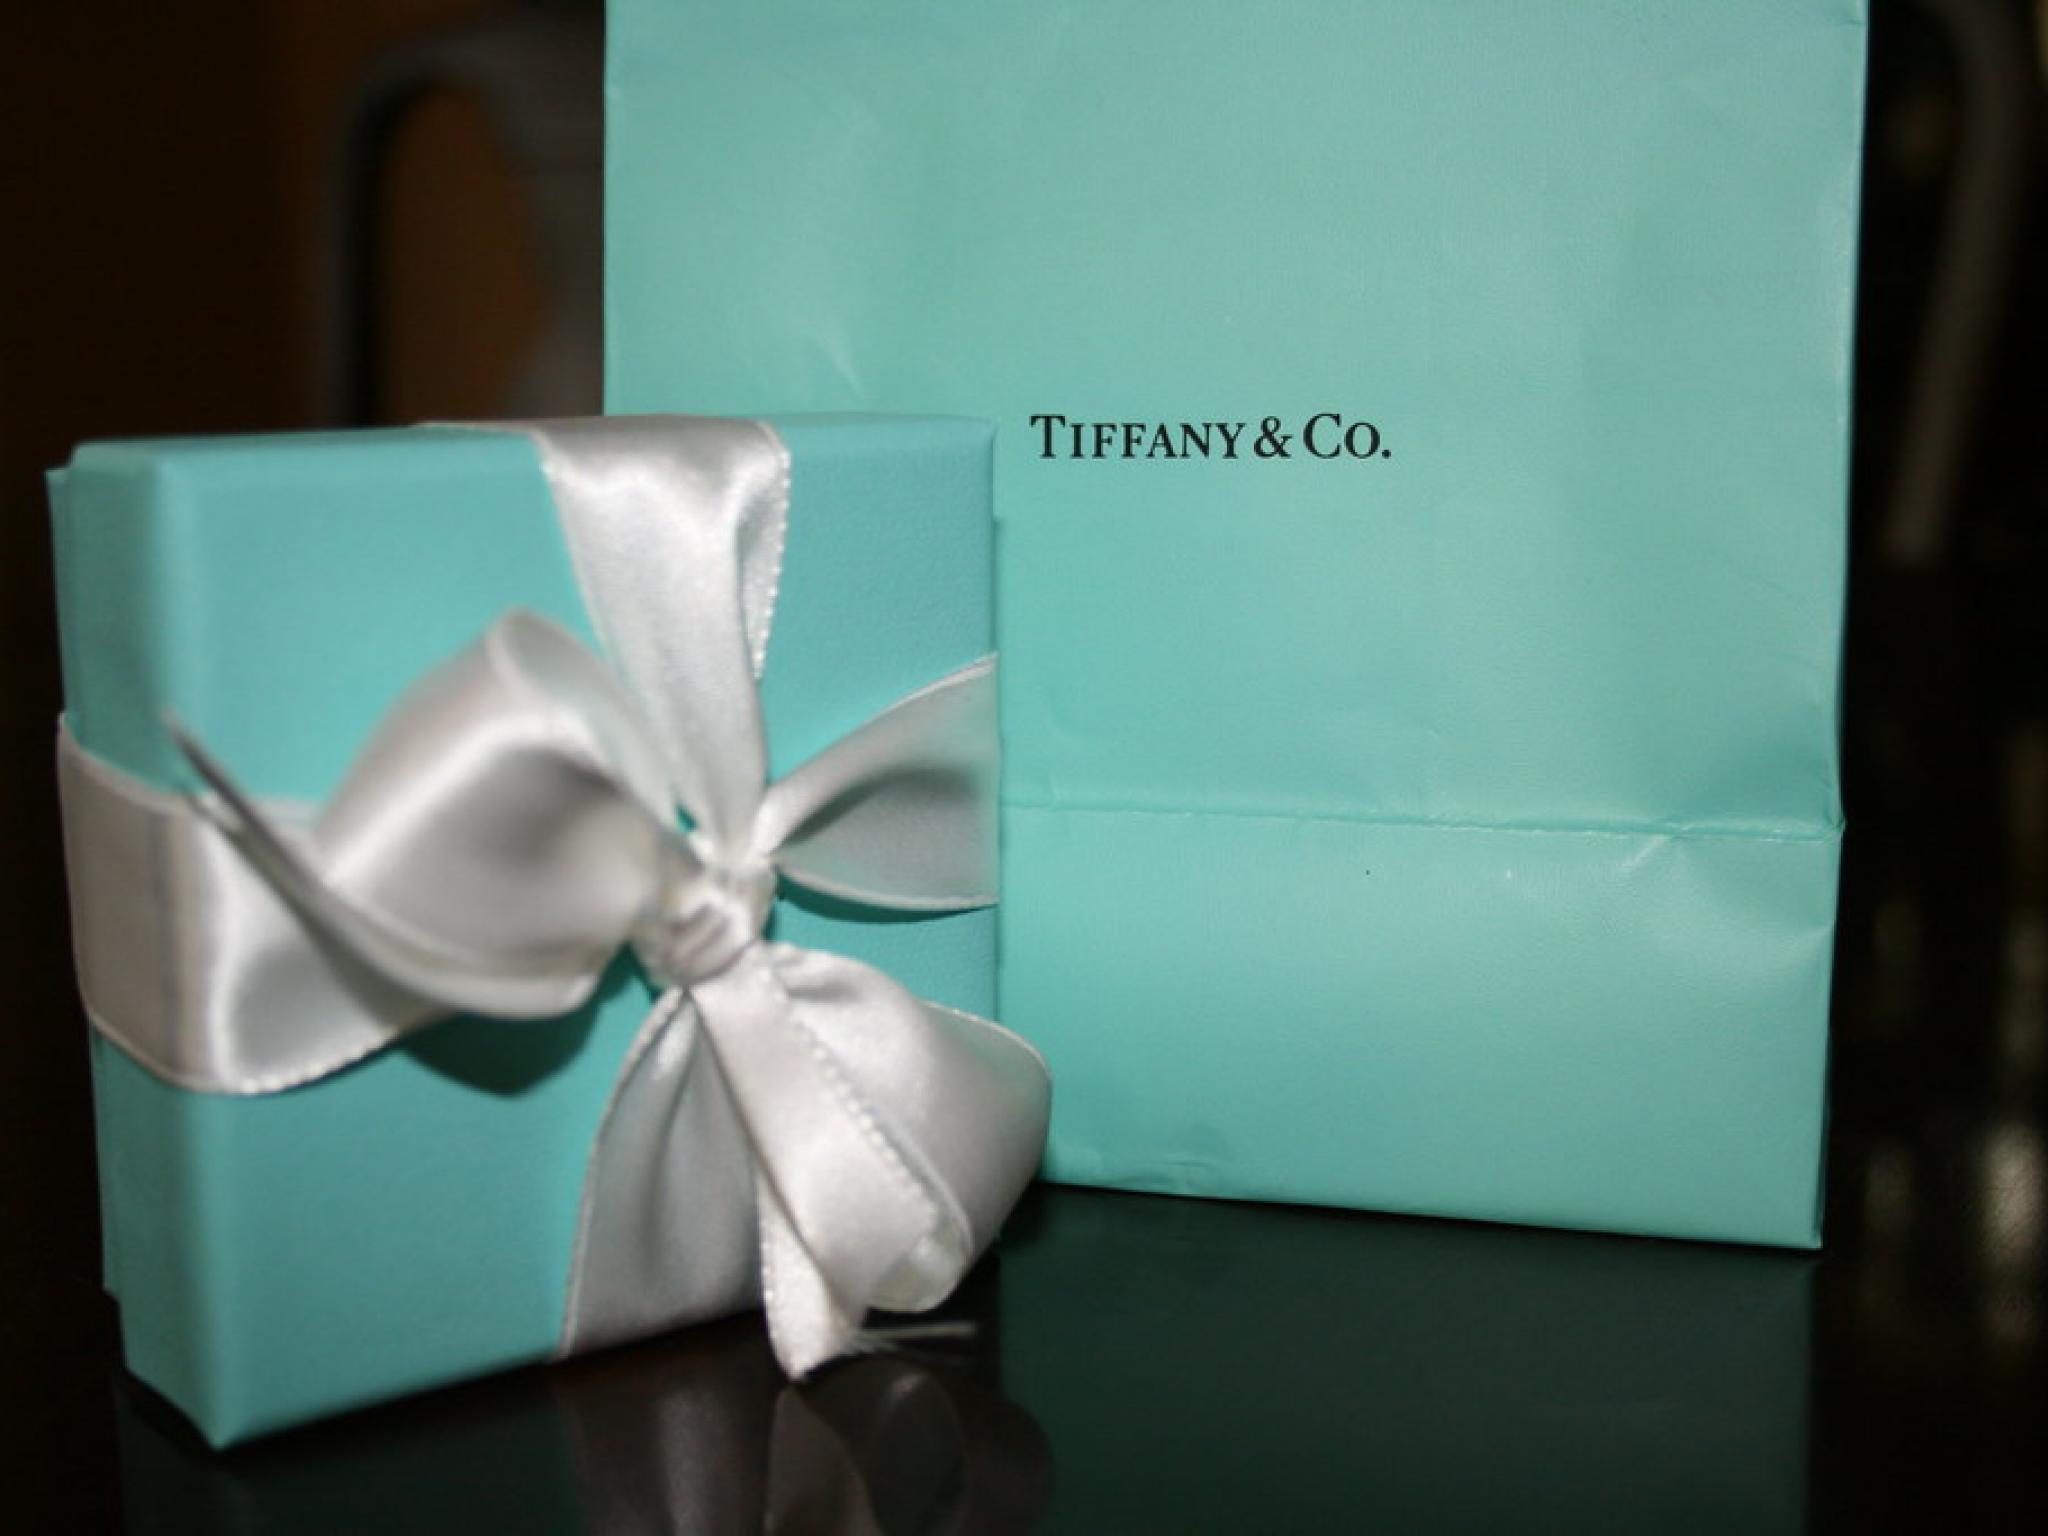  tiffany-board-signs-off-on-discounted-merger-deal-with-lvmh 